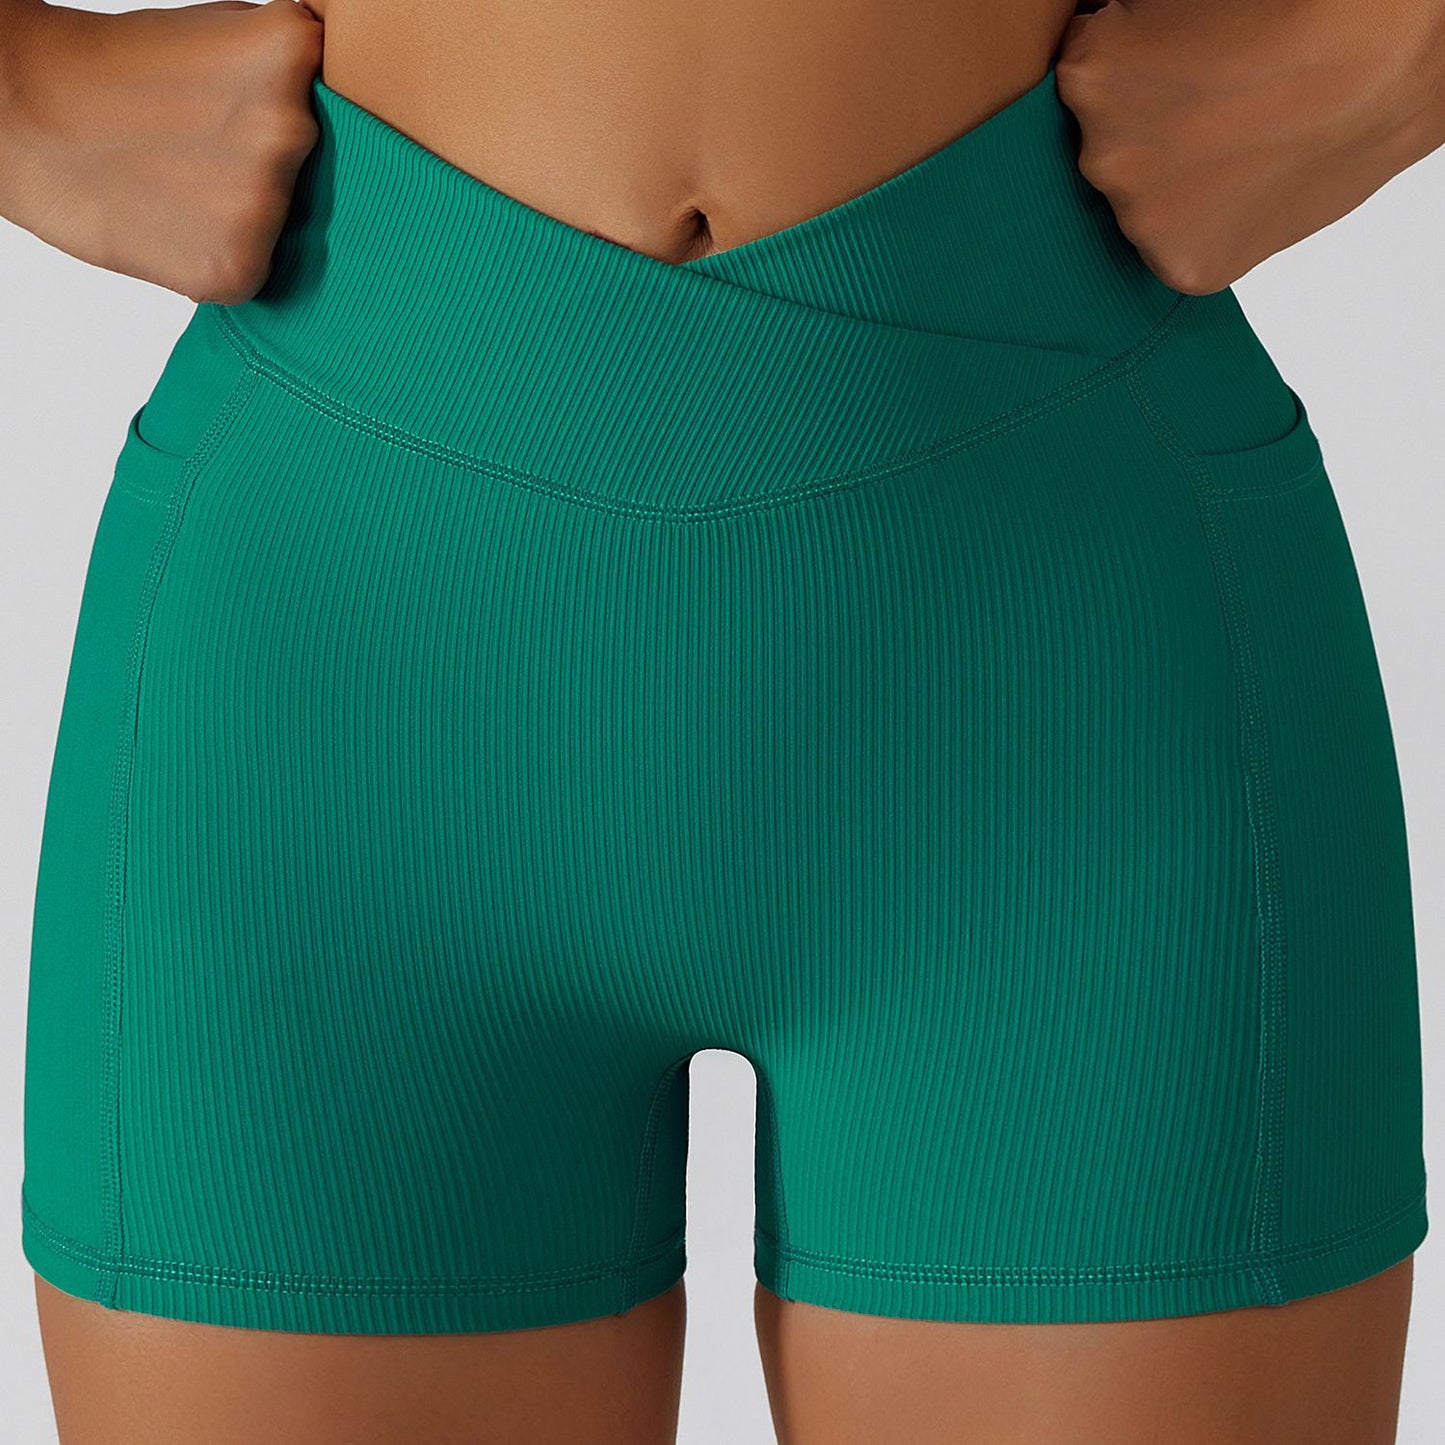 Seamless Shorts For Women Push Up Booty Workout High Waist Shorts Fitness Sports Short Gym Clothing Summer Yoga Shorts Active